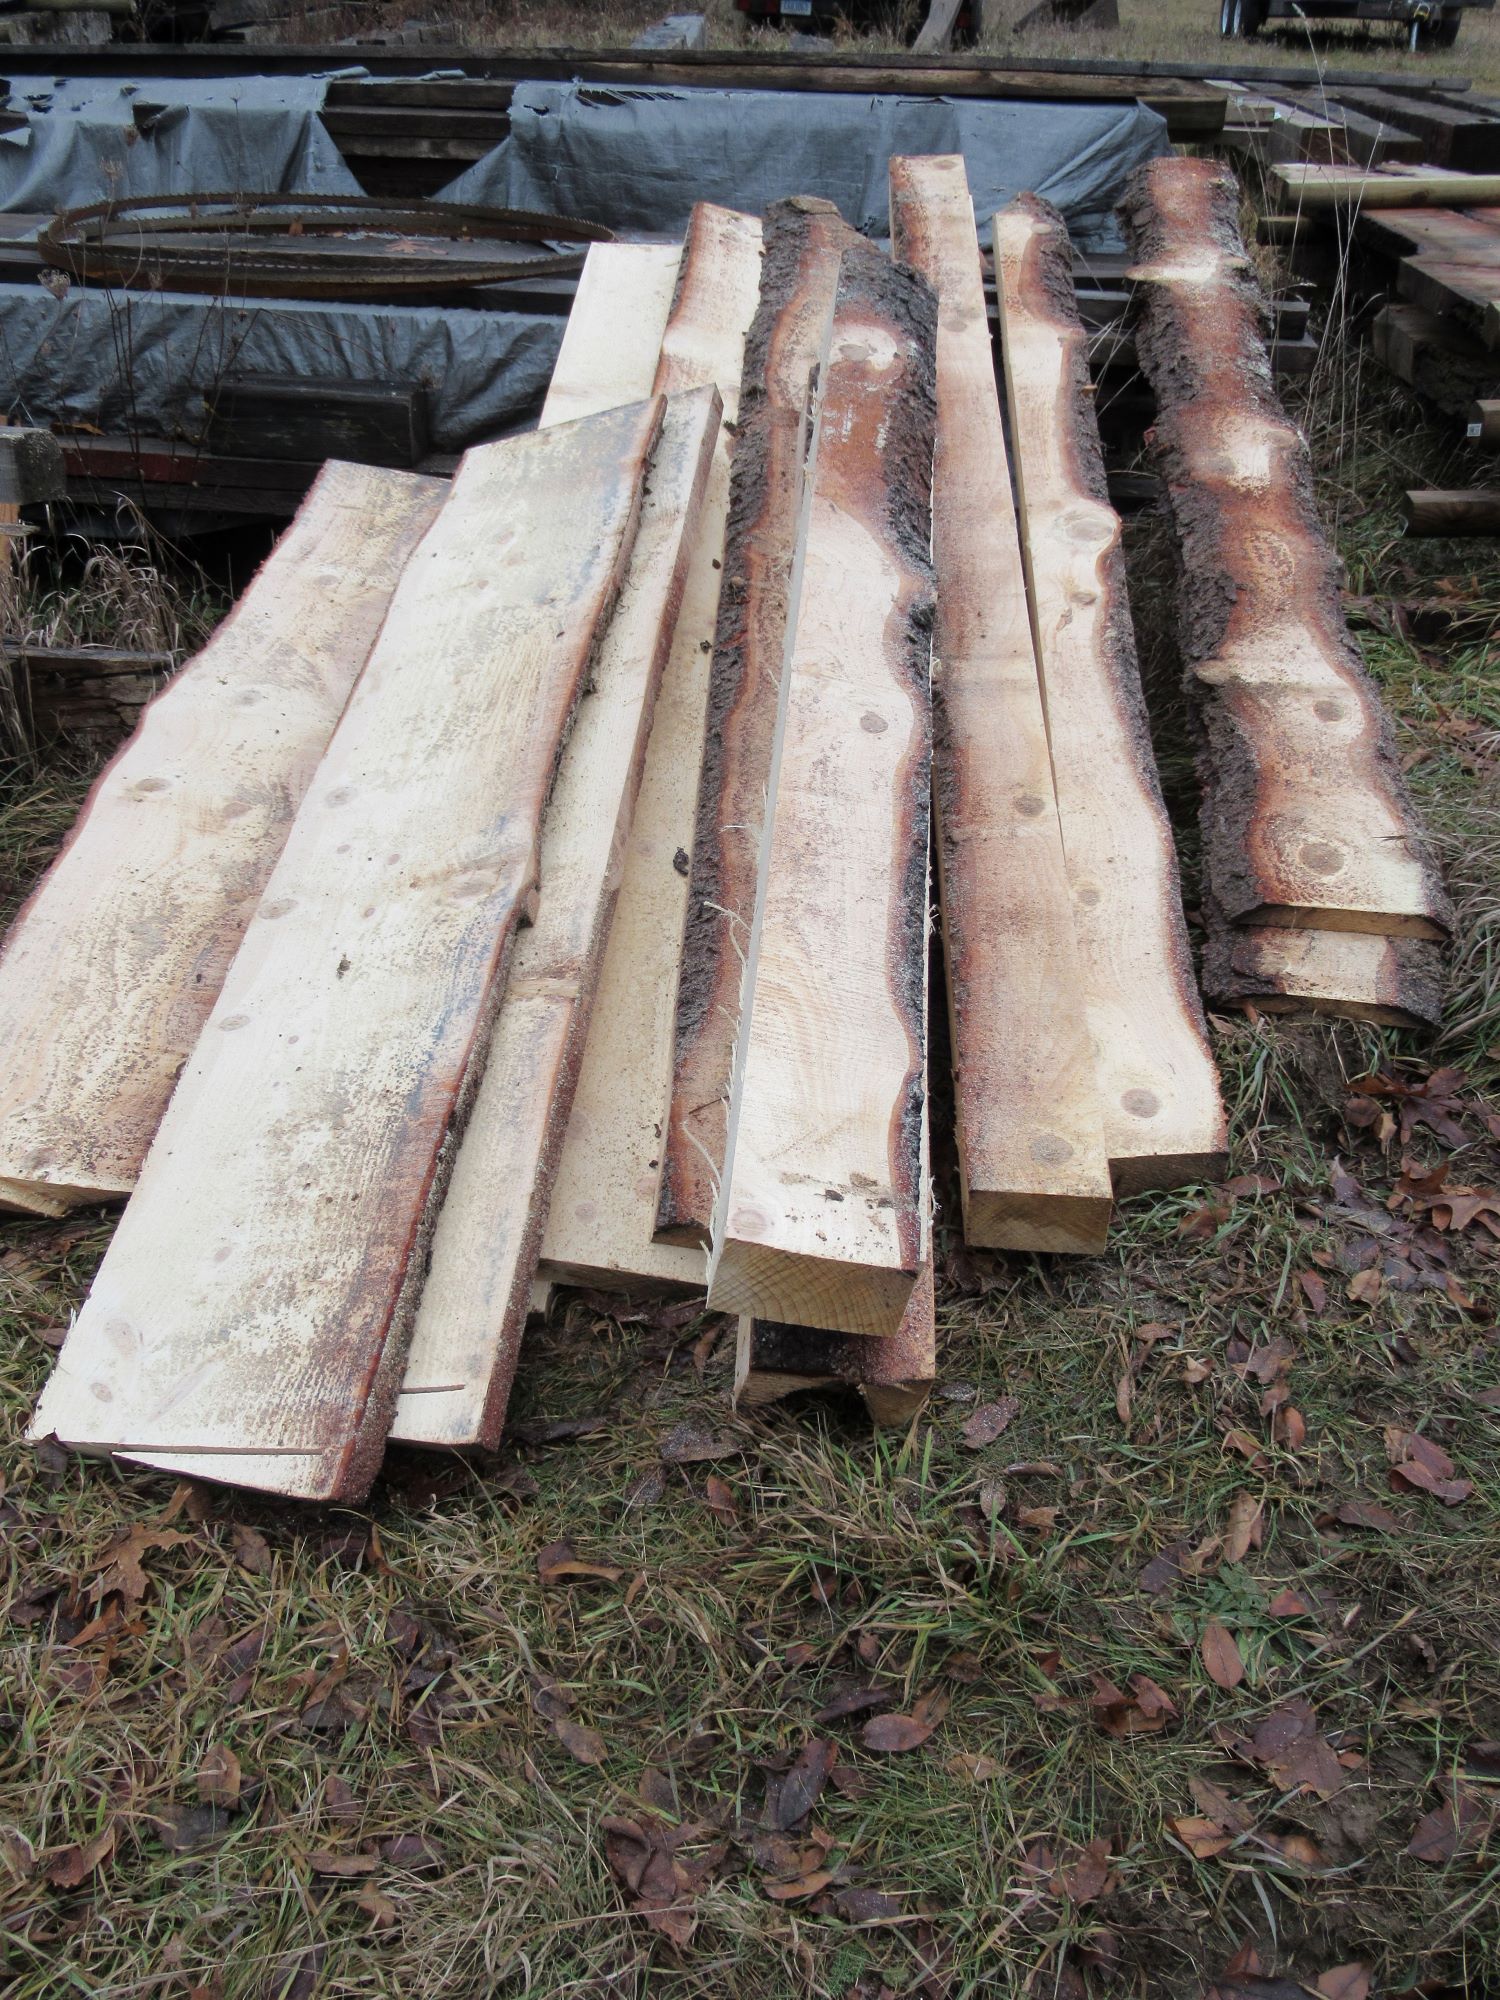 A stack of freshly milled white pine